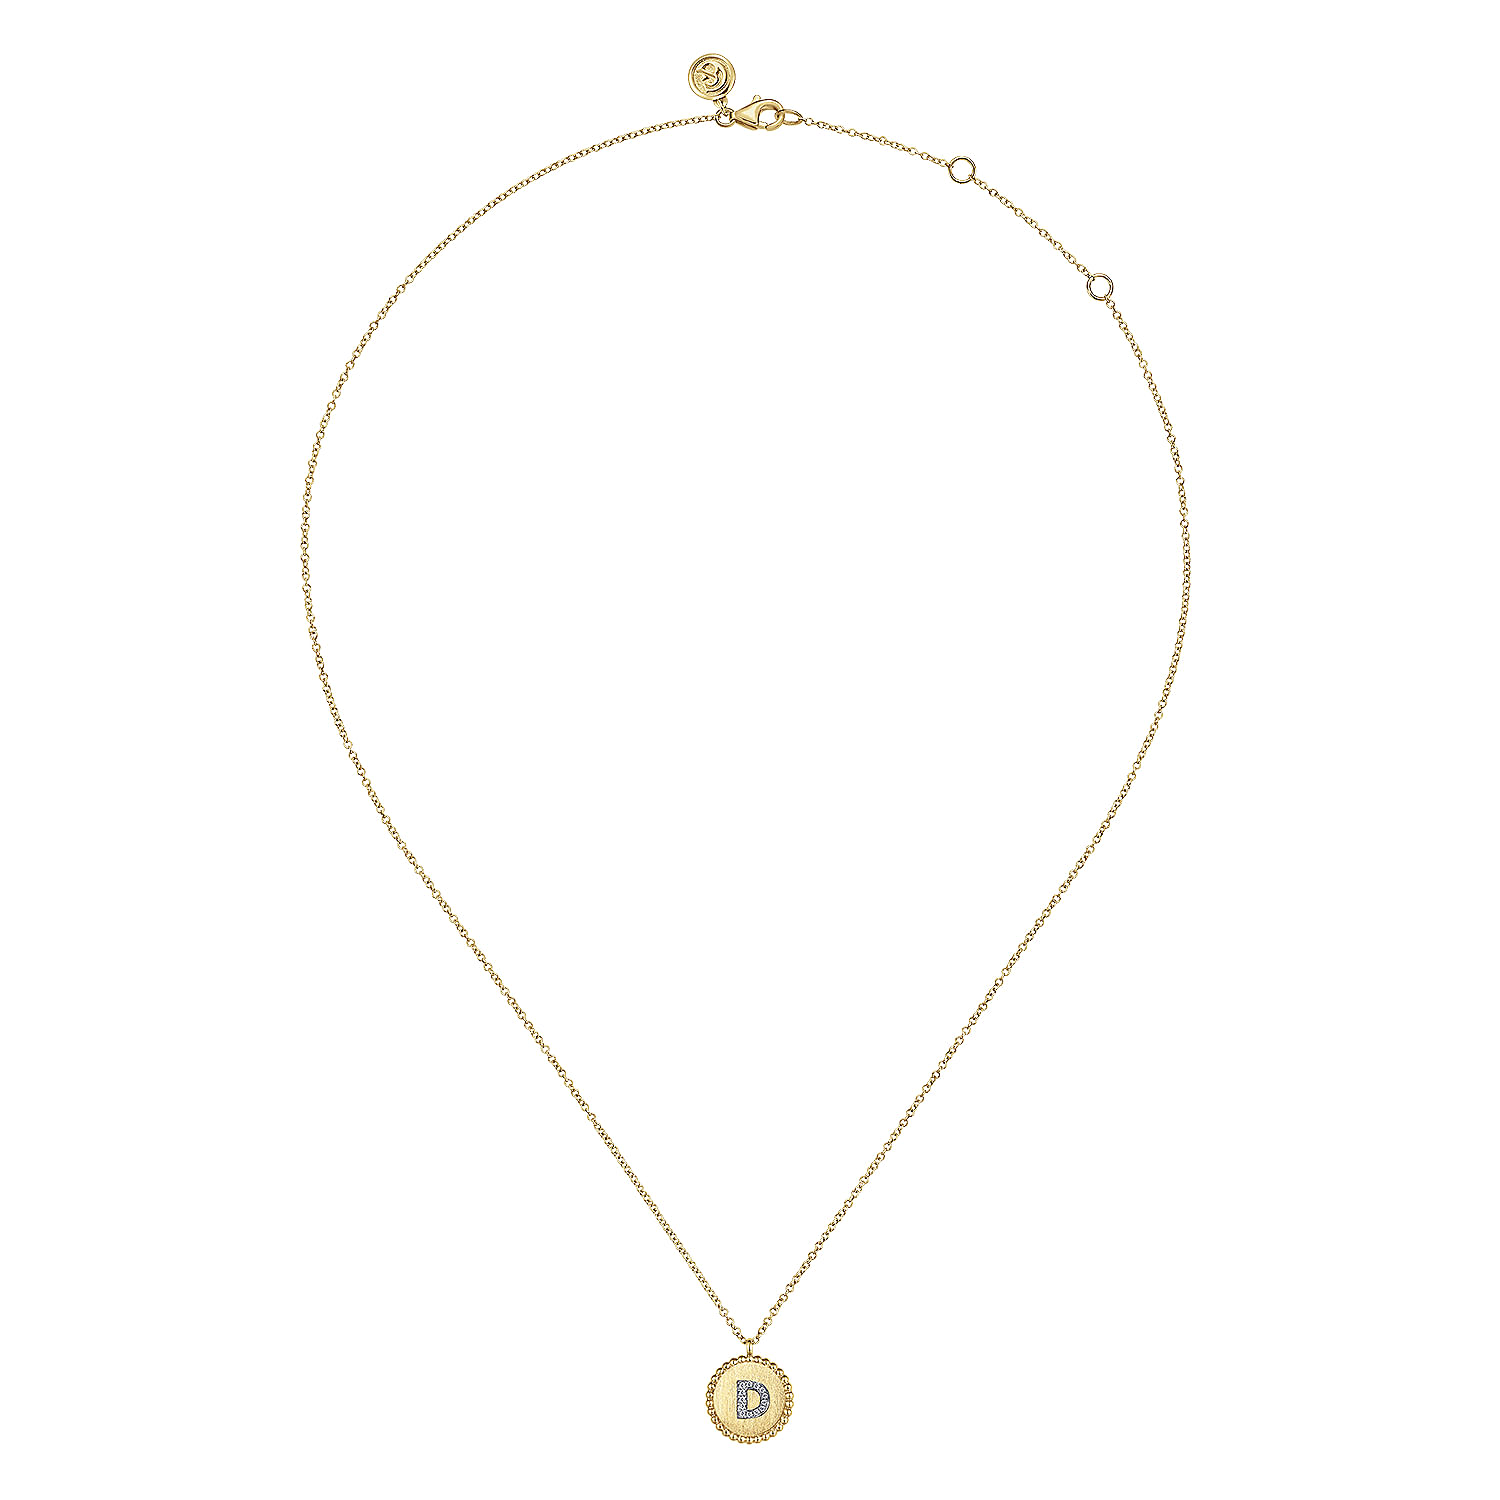 14K Yellow Gold Round D Initial Pendant Necklace with Diamonds